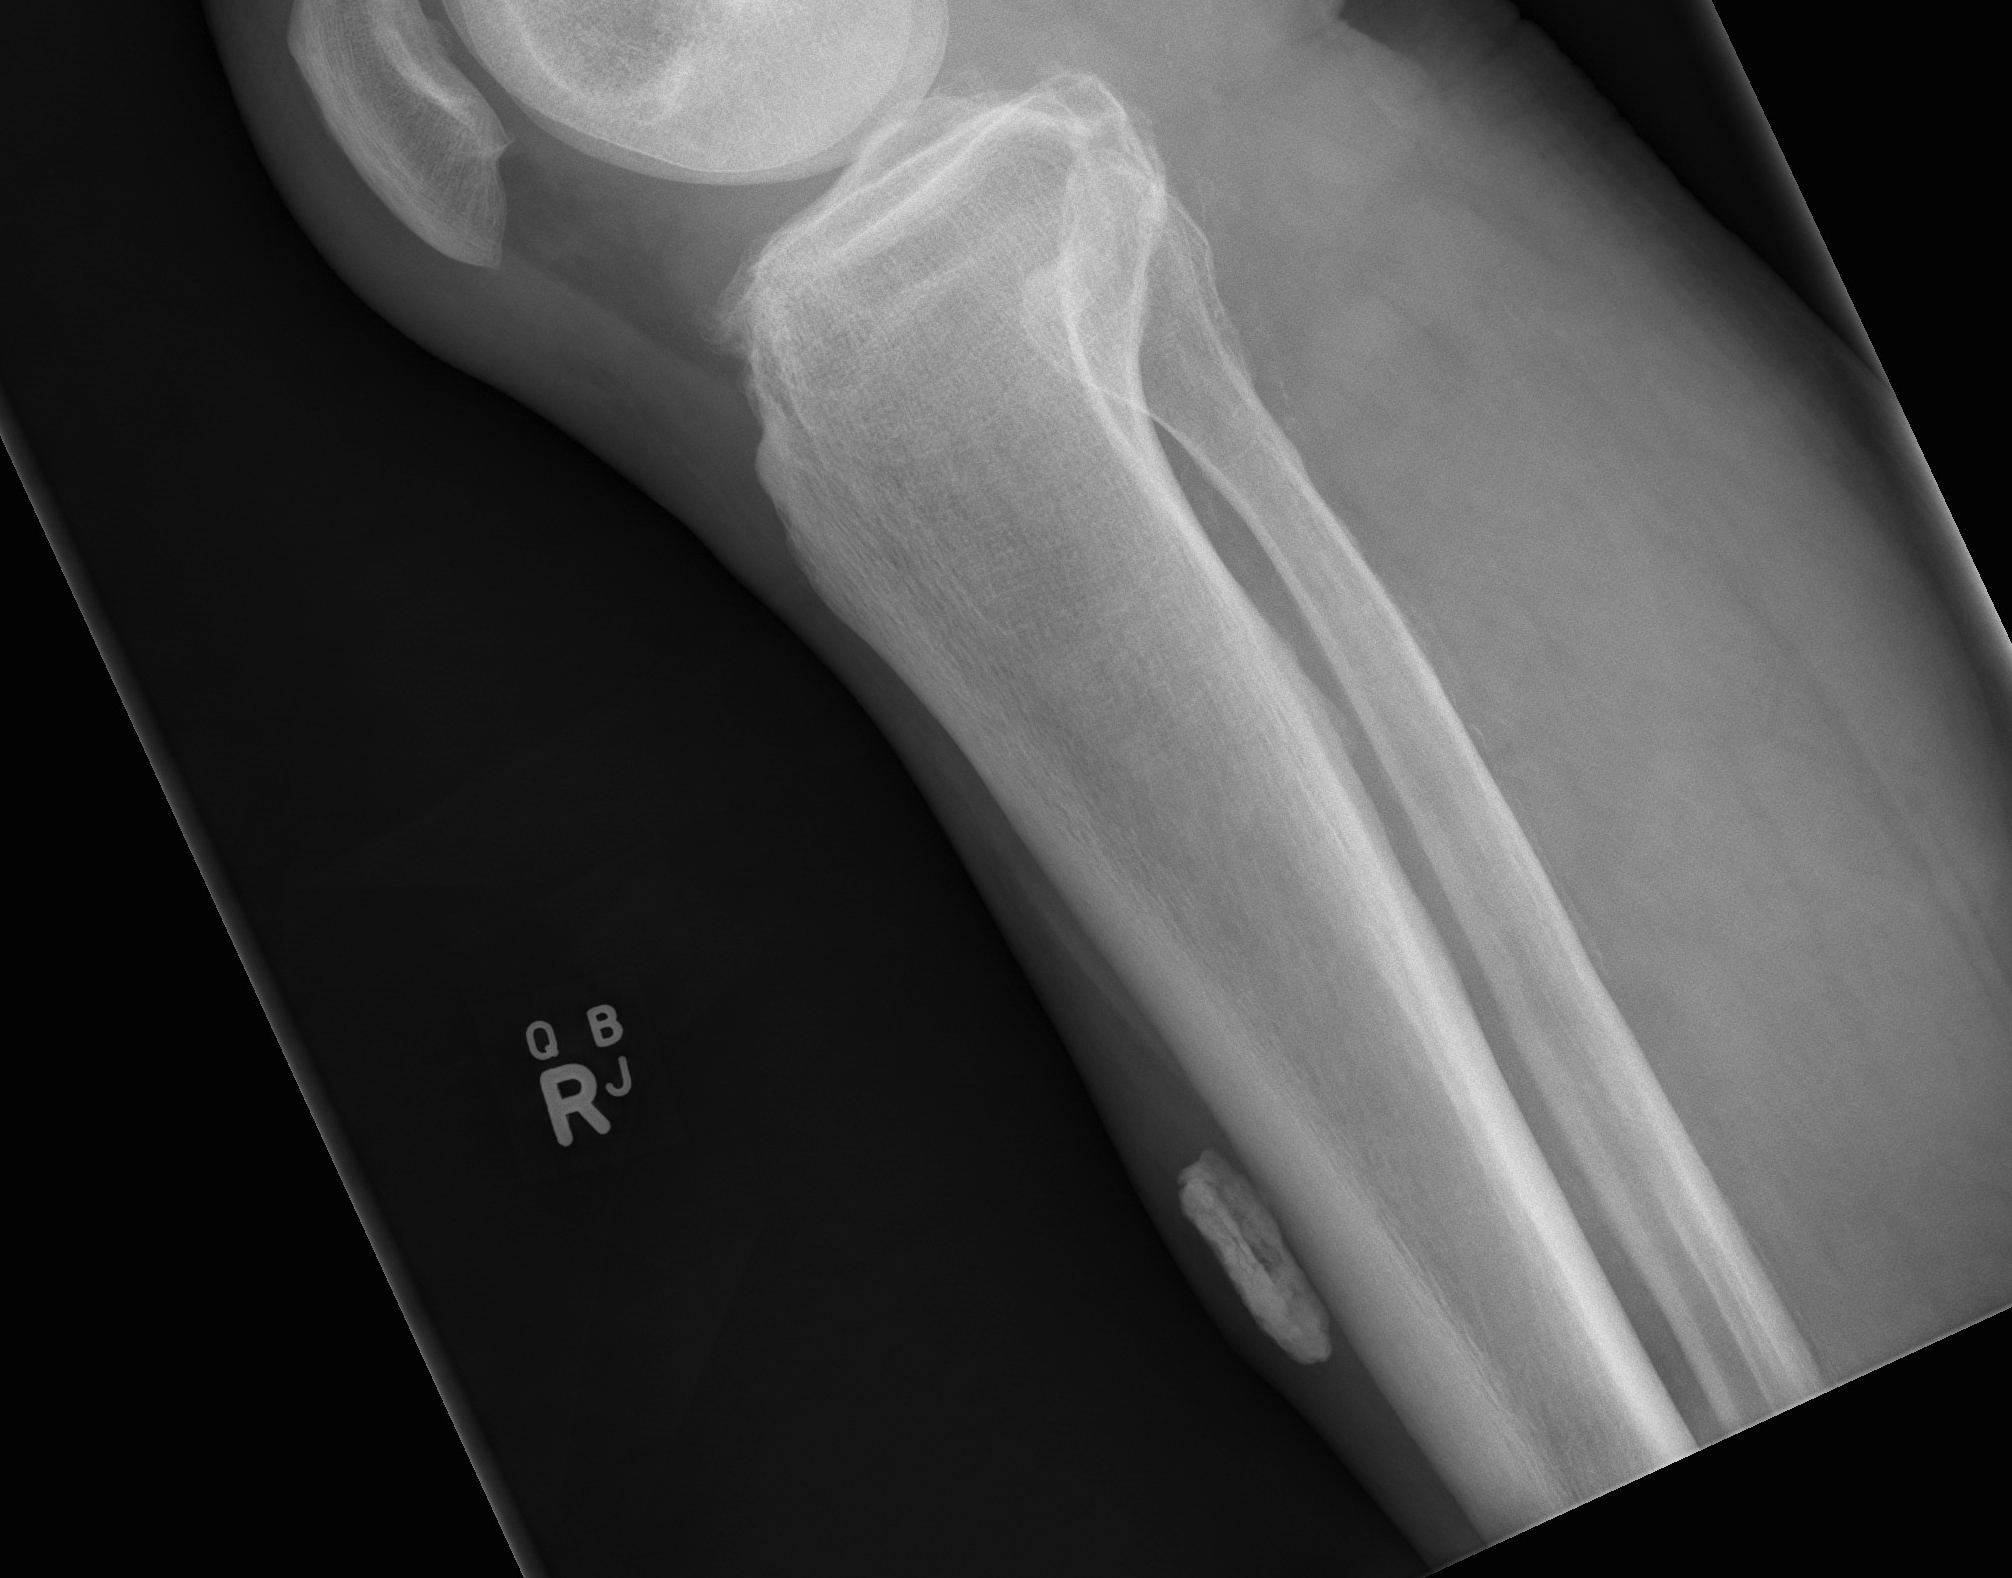 Myositis Ossificans Tibia Lateral